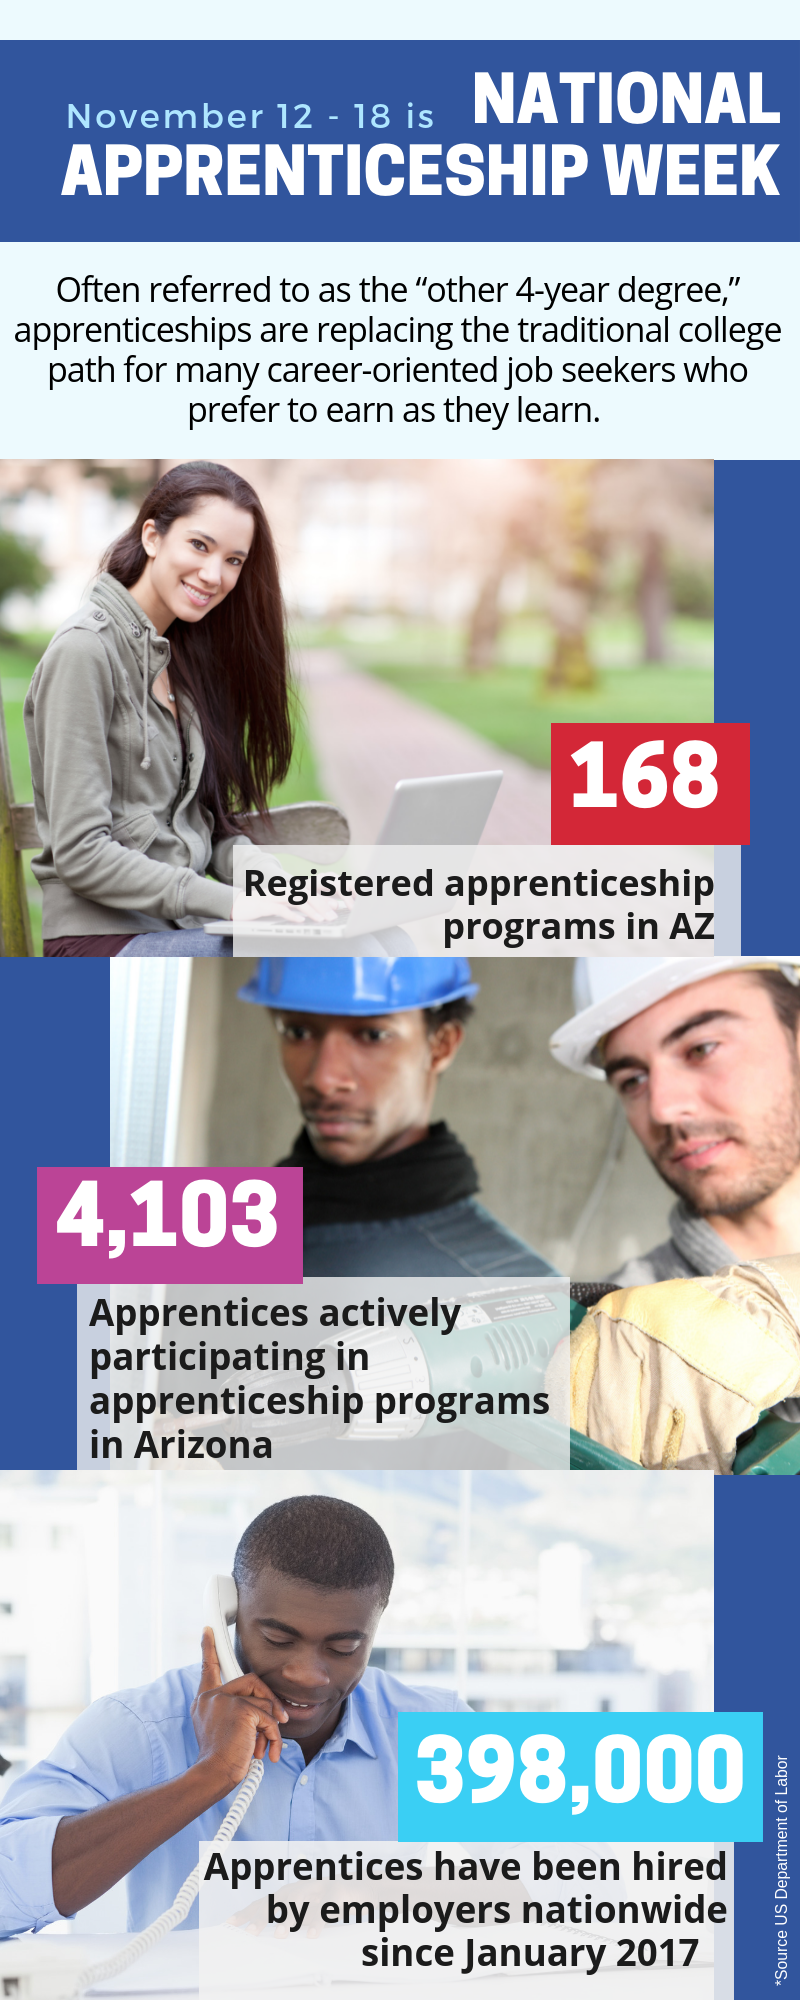 Facts and figures about National Apprenticeship Week.